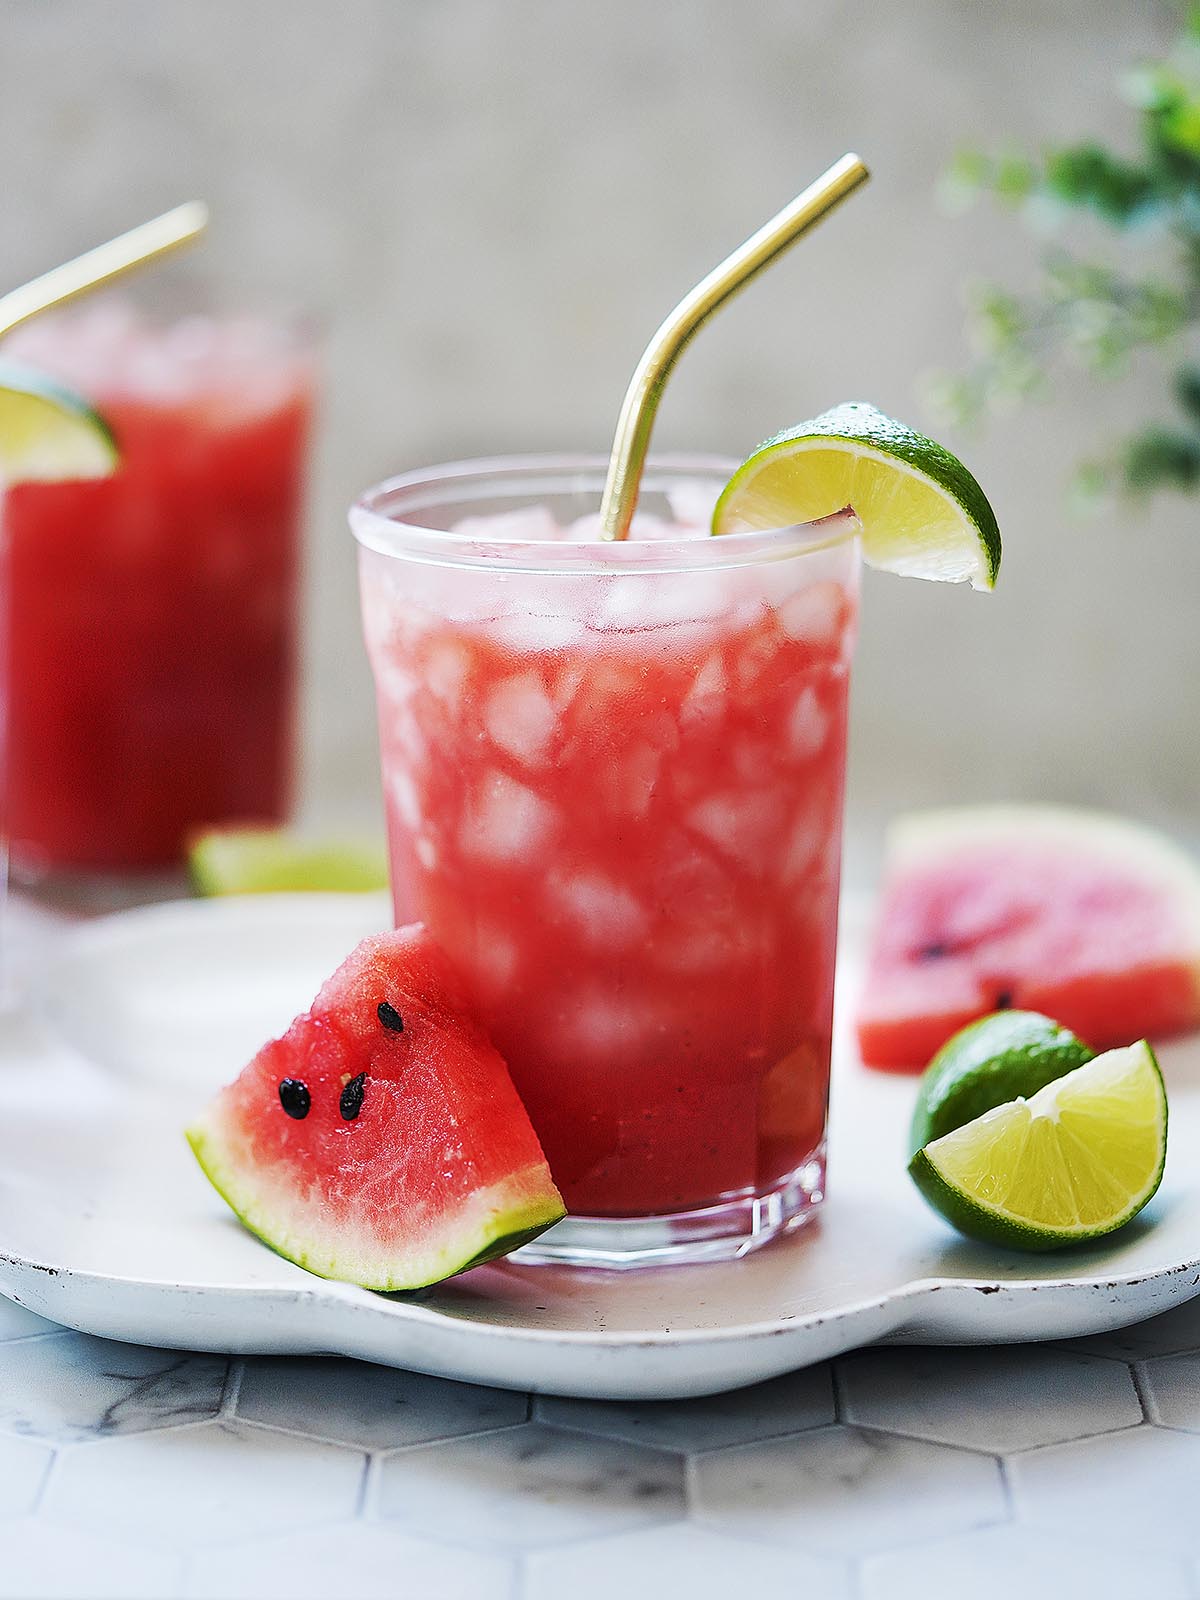 Two glasses filled with ice and watermelon juice with limes on the side.